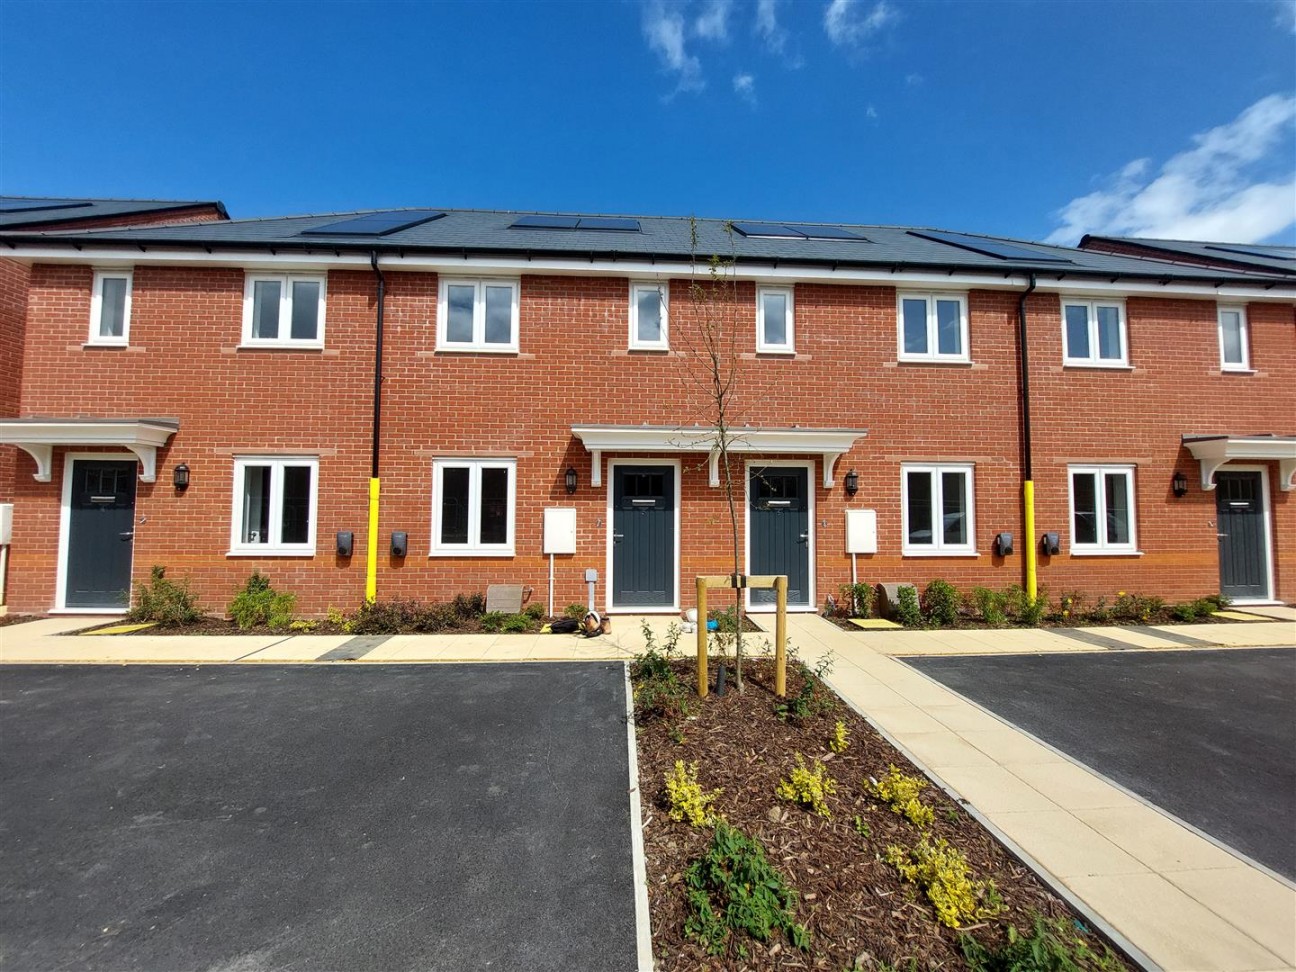 Reed Close, Twigworth - shared ownership